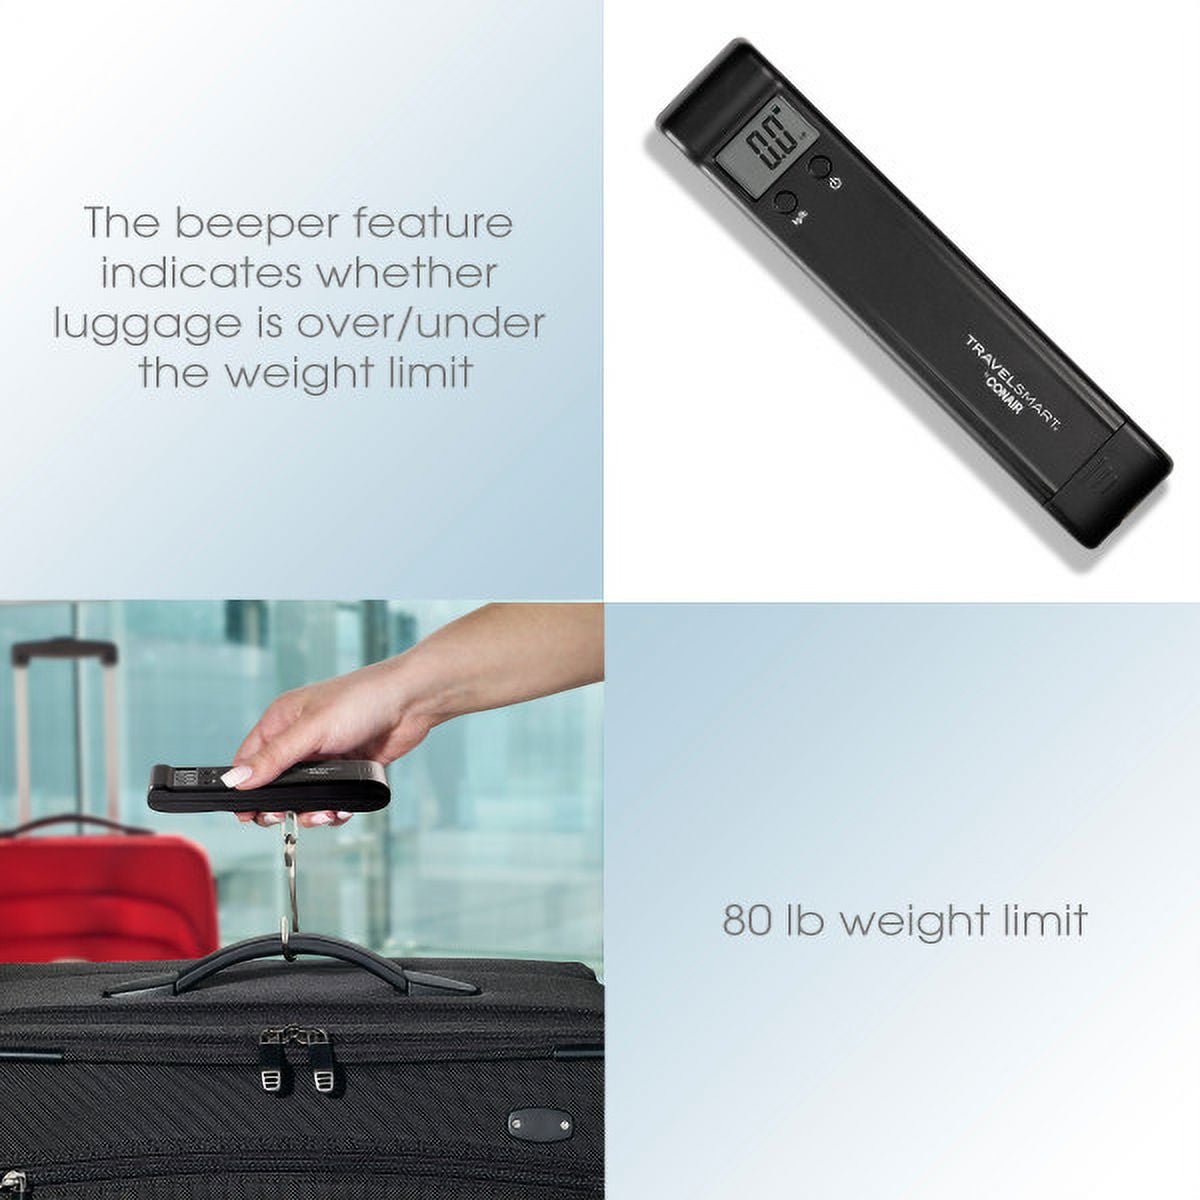 CONAIR-TRAVEL Smart Compact Digital Luggage Scale - TS601LS